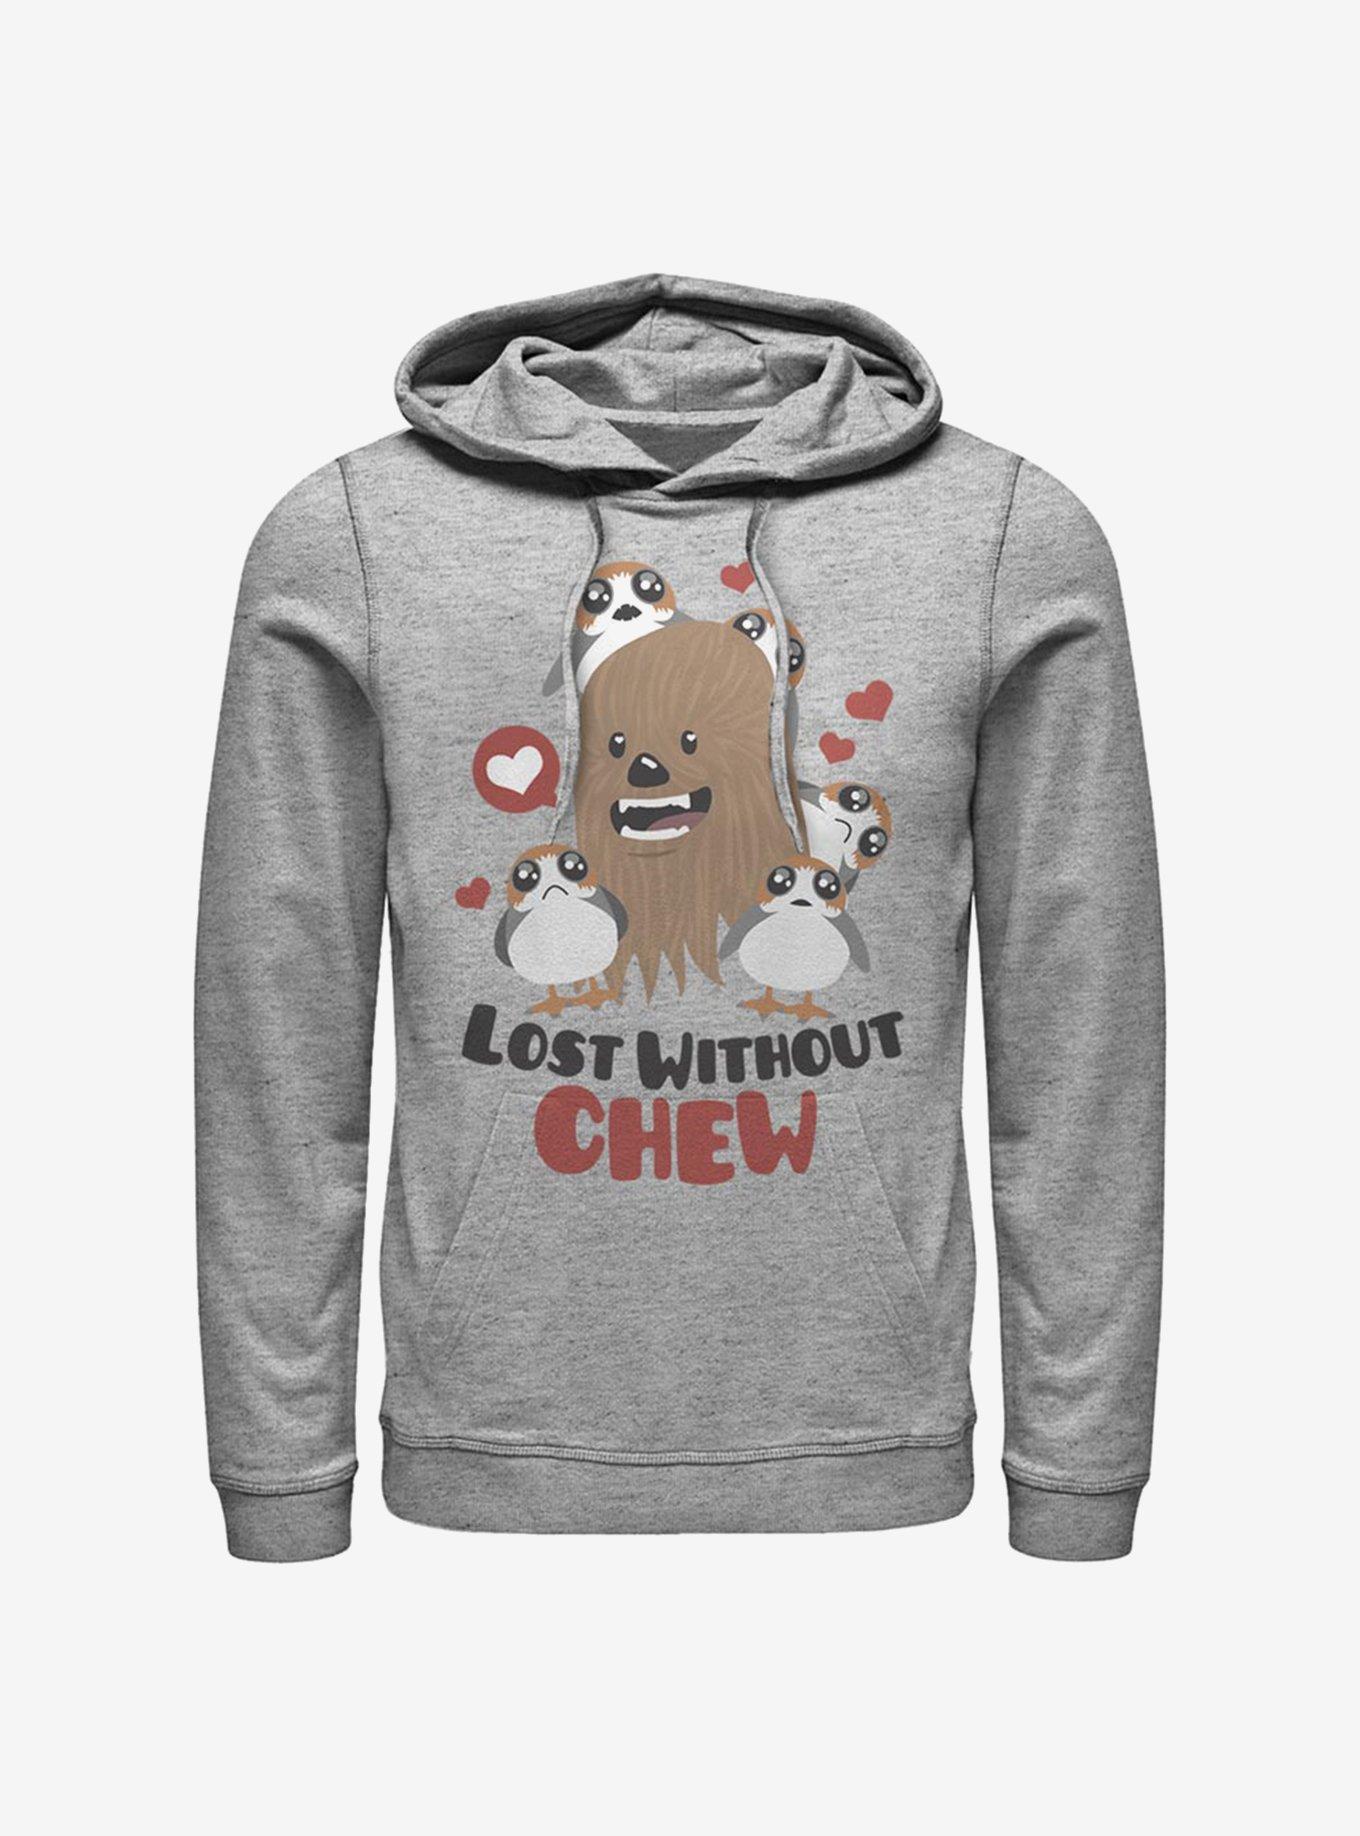 Star Wars Episode VIII The Last Jedi Lost Without Chew Hoodie, , hi-res